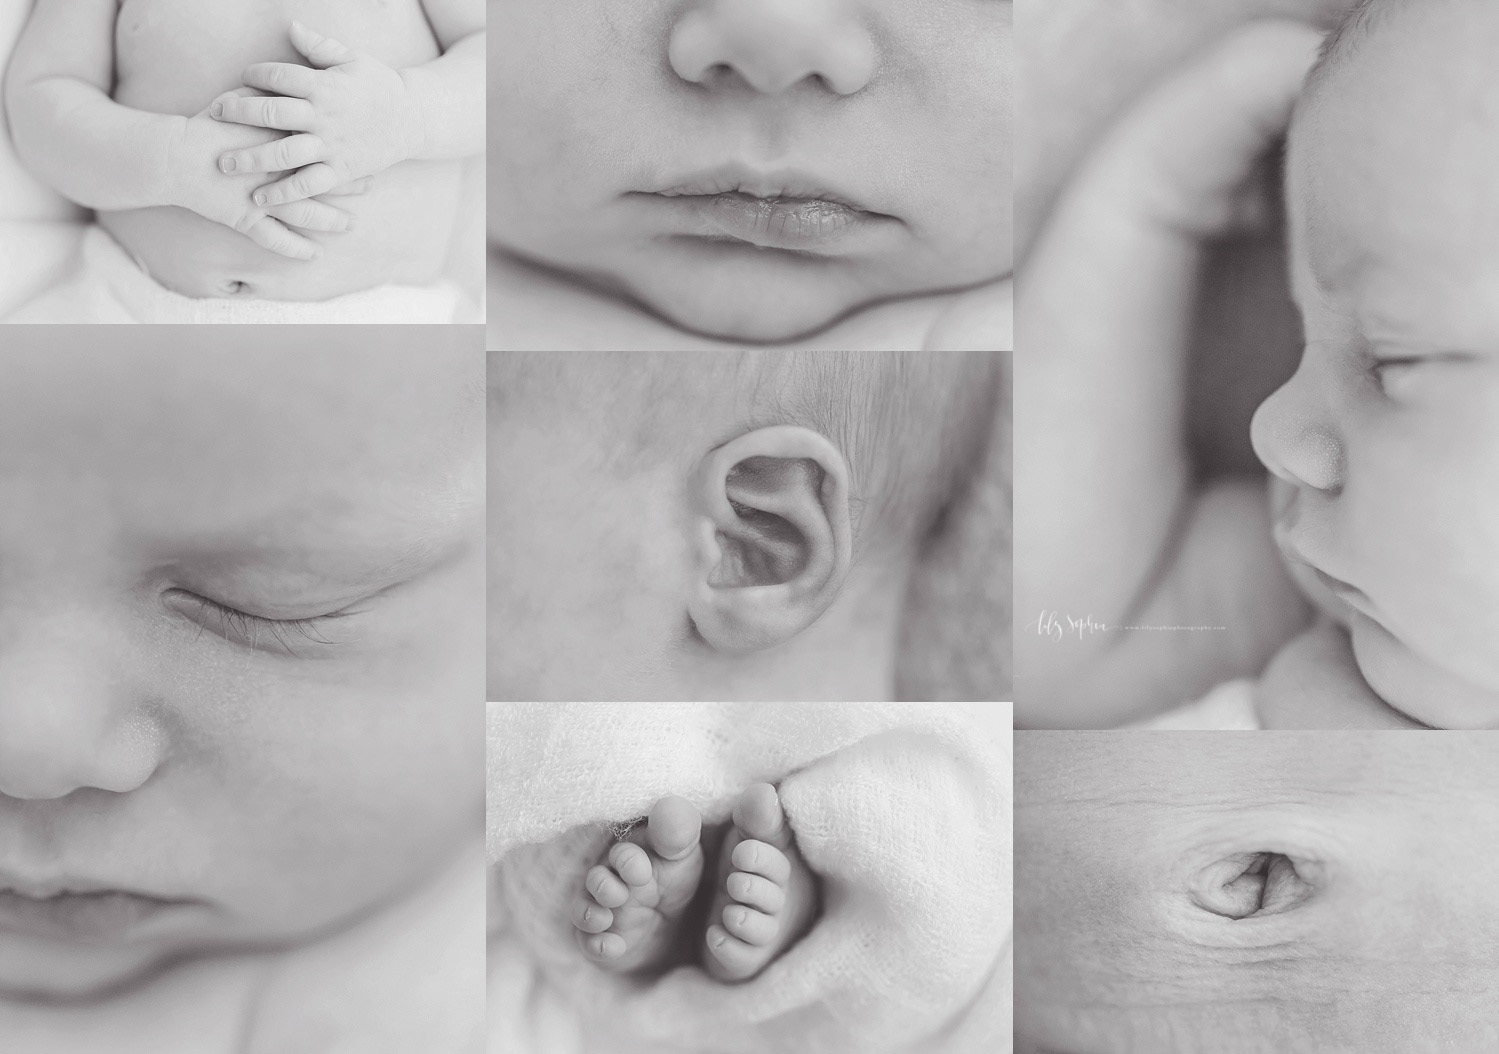  Black and white photo collage of macro images of a newborn baby's hands, lips, nose, eye lashes, ear, toes and belly button.&nbsp; 